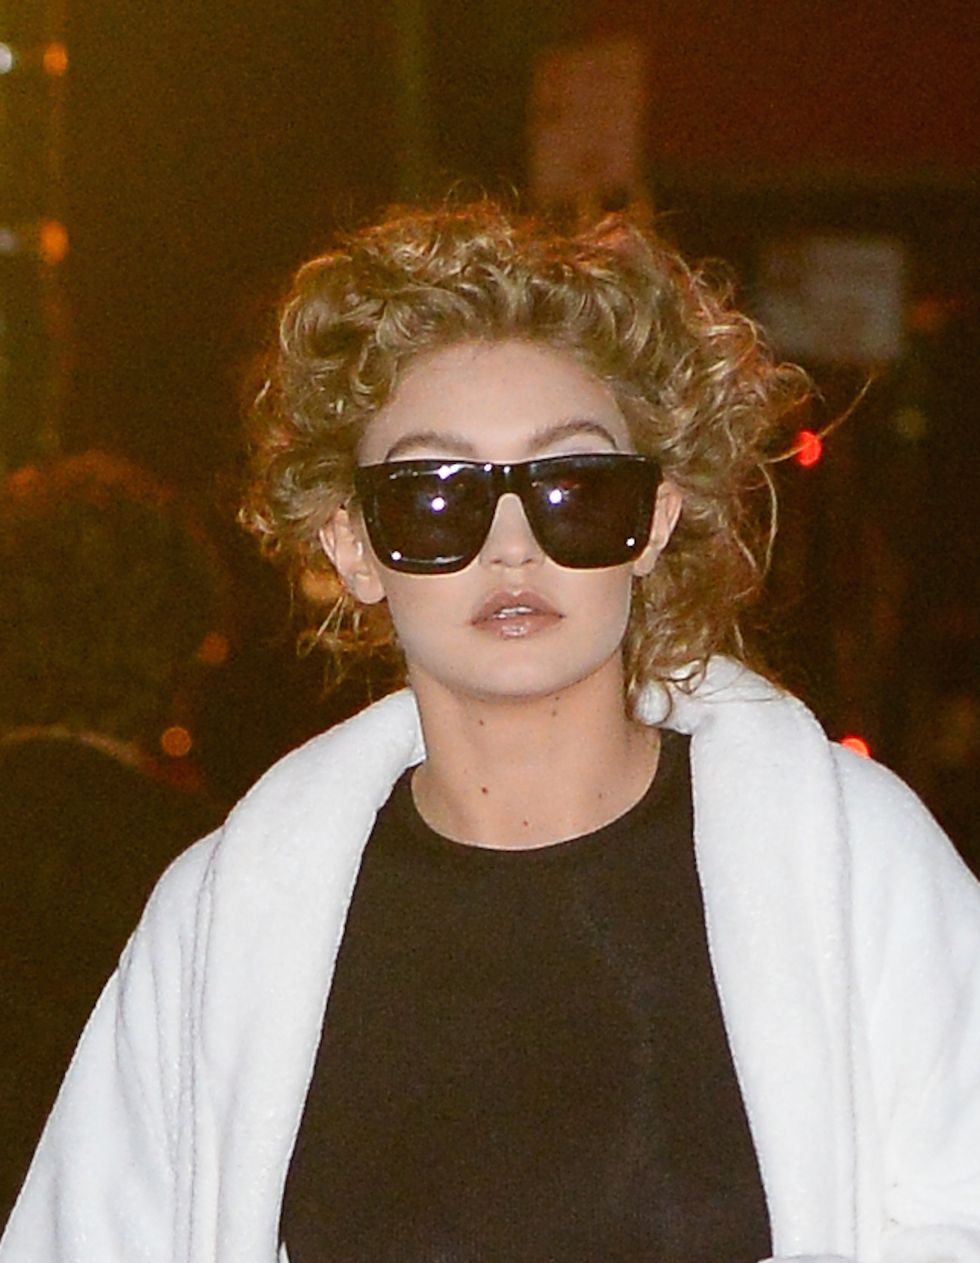 Gigi Hadid steps out with a very curly, very short hairdo